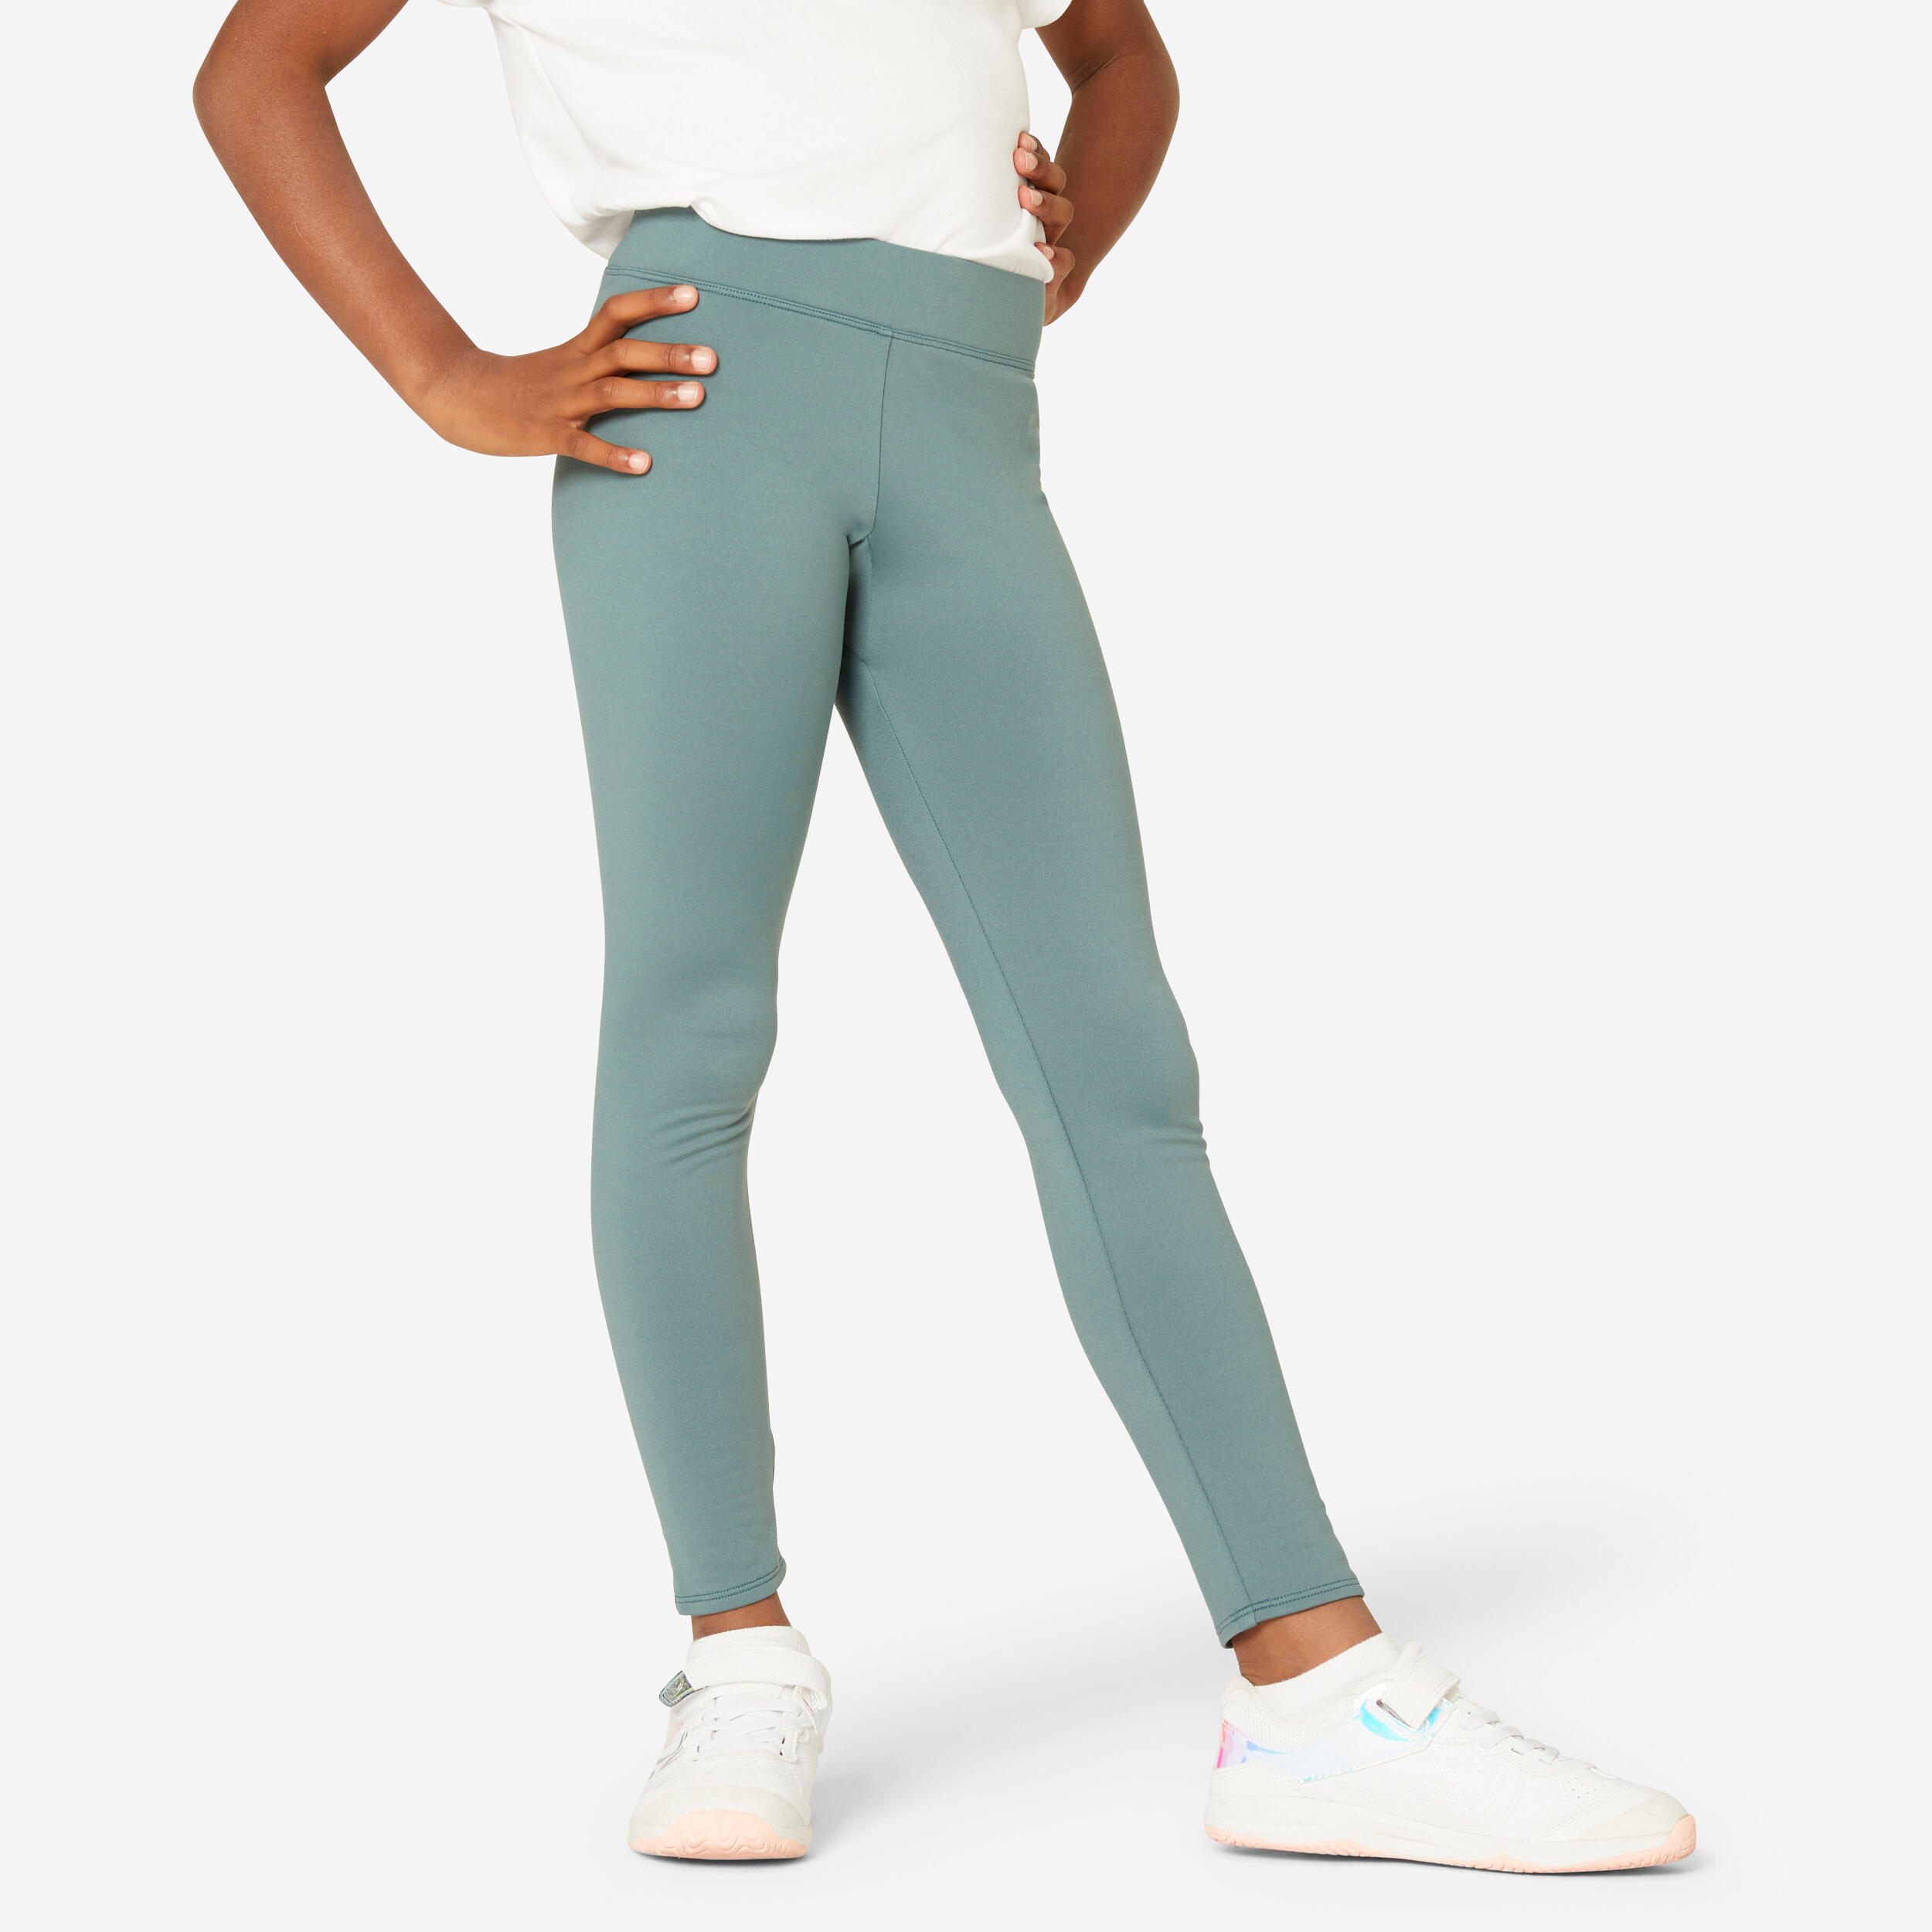 DOMYOS Legging Chaud Fille Synth&#xE9;tique Respirant - S100 Vert